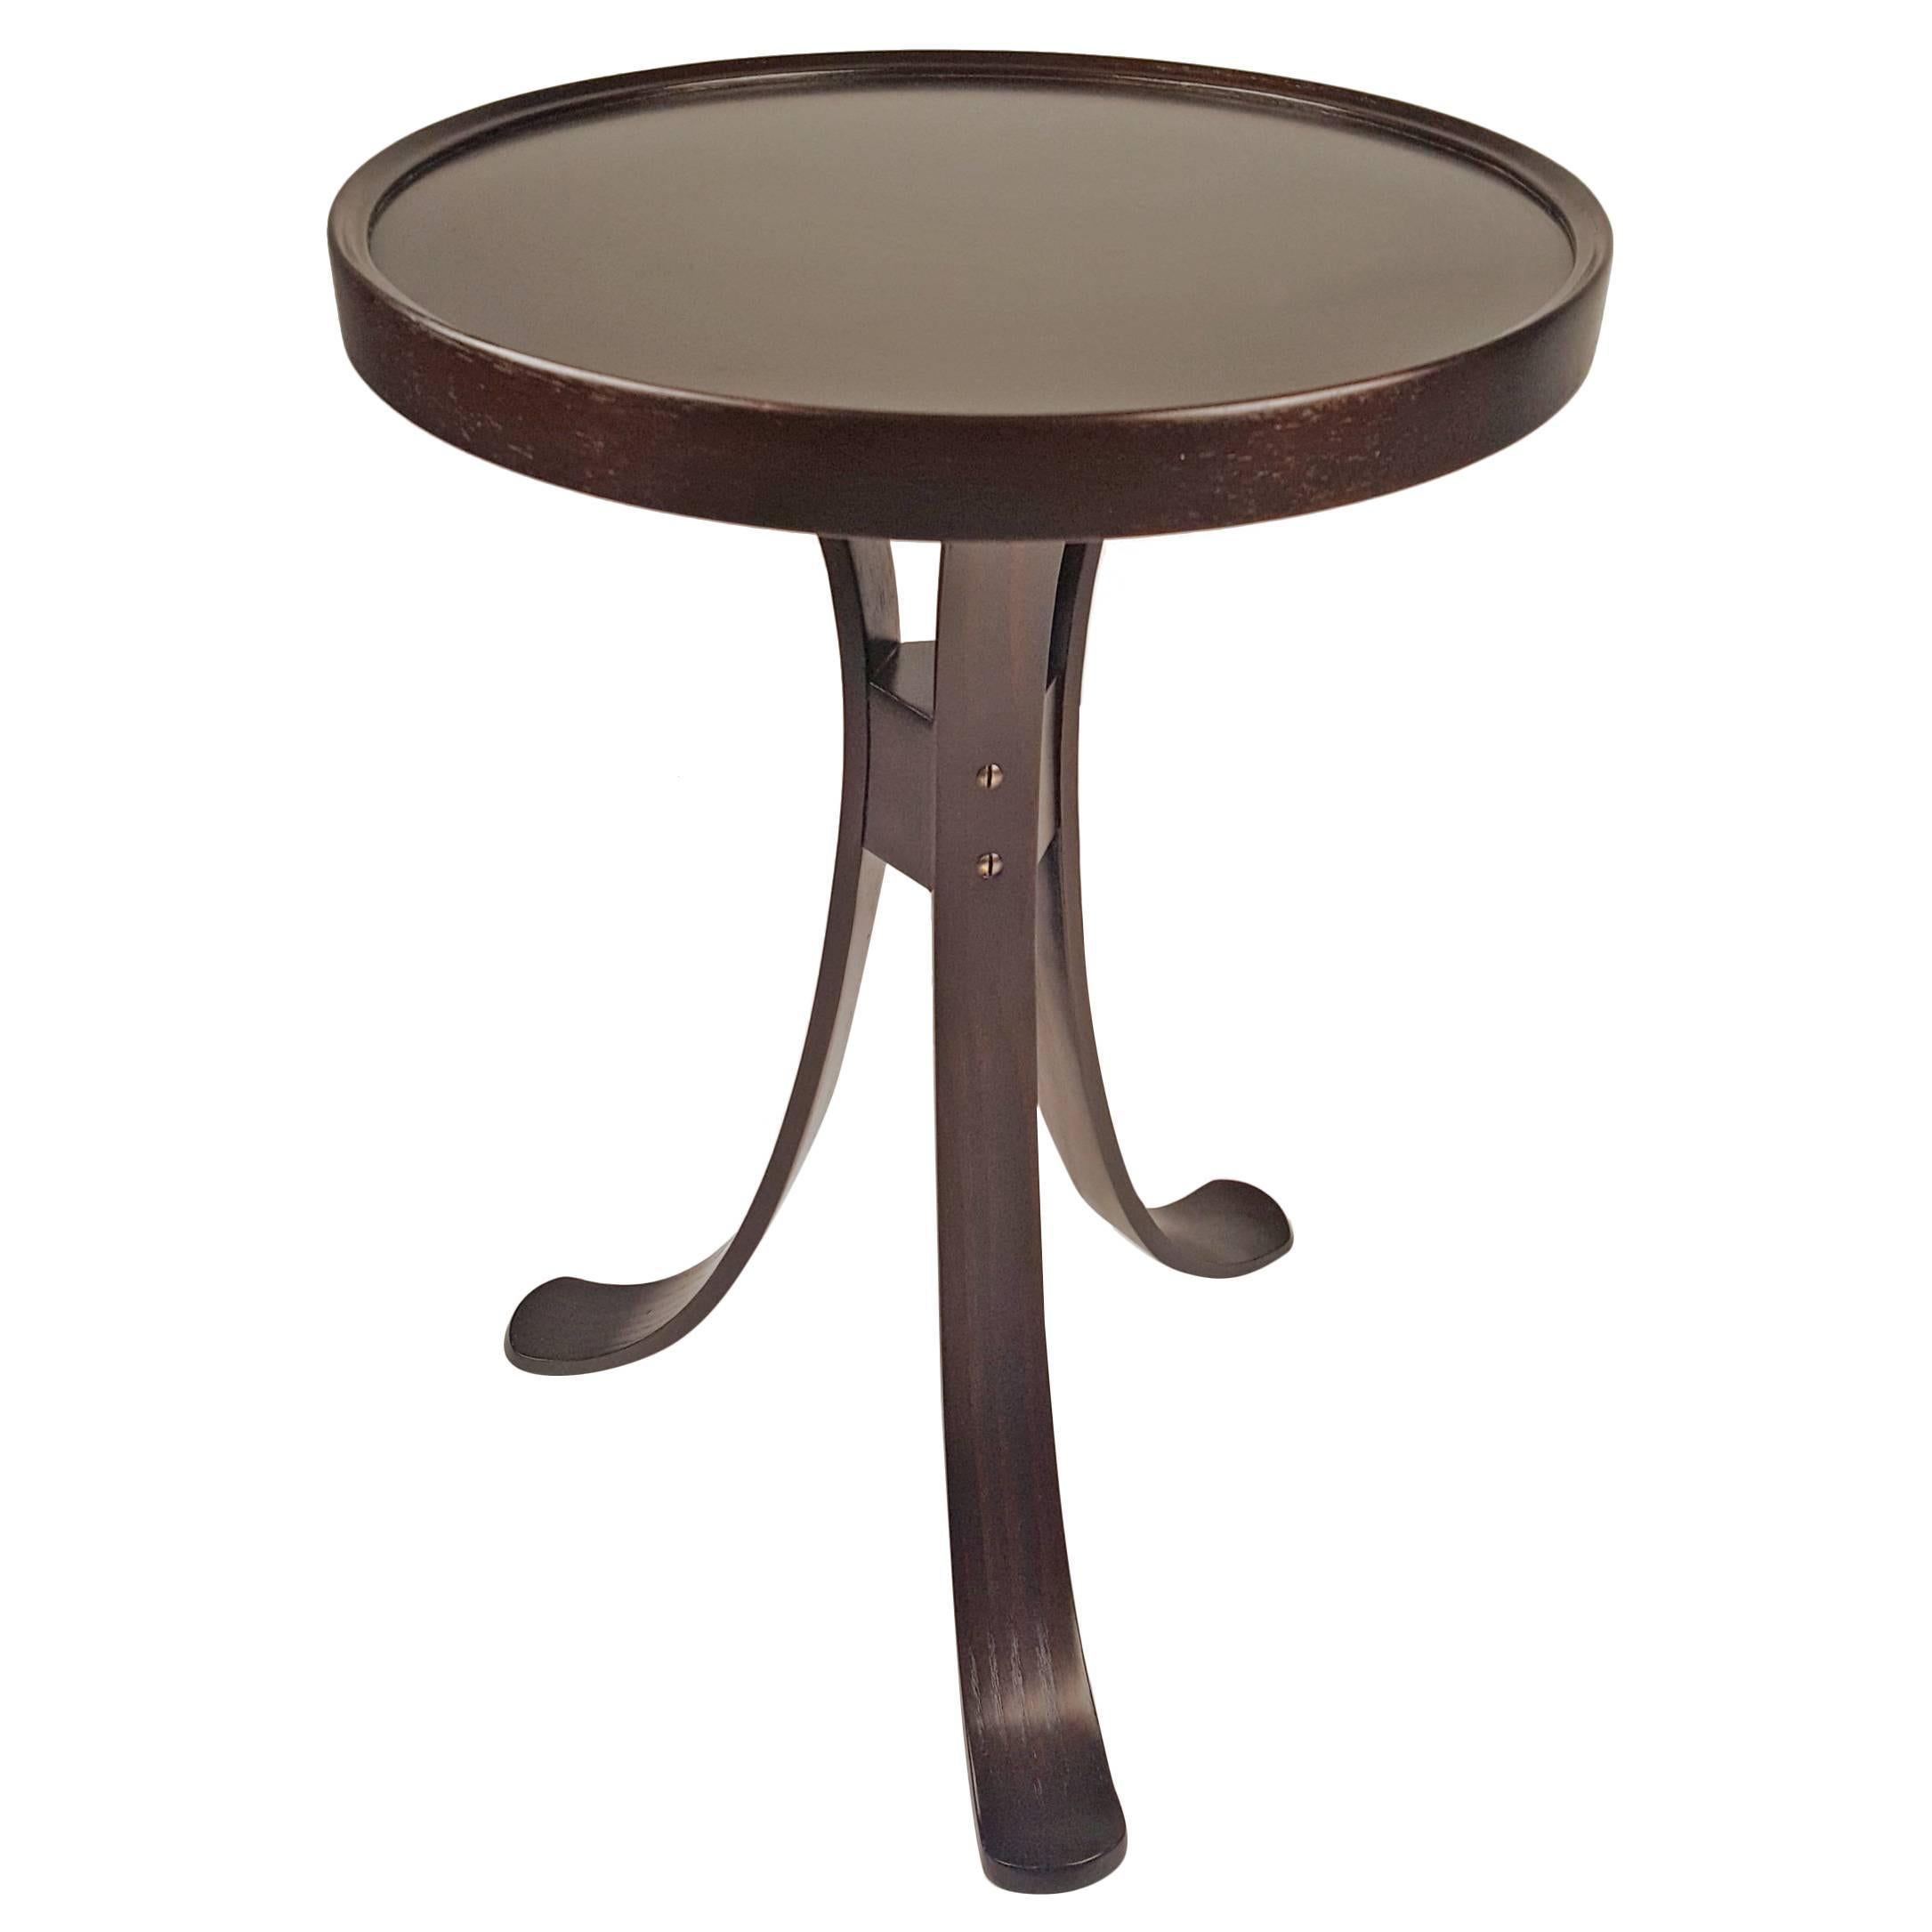 Tripod Drink Table by Roger Sprunger for Dunbar